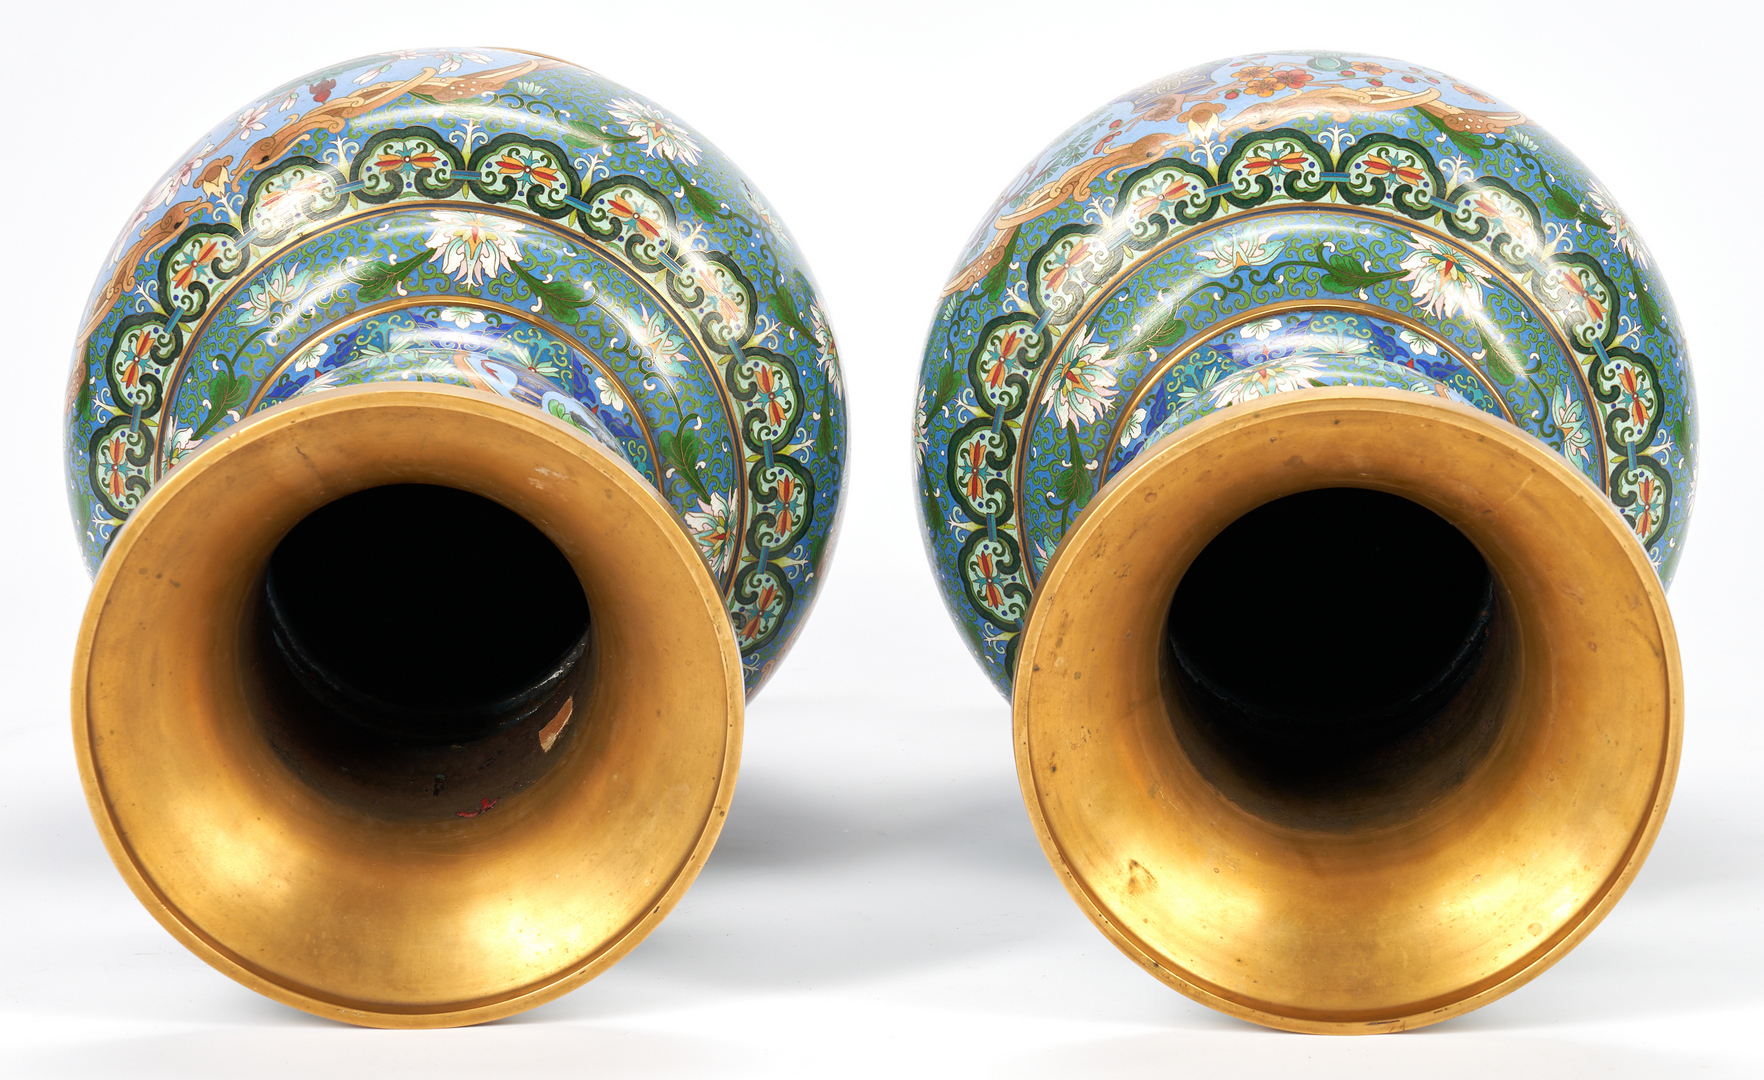 Lot 291: Pair of Chinese Cloisonne Floor Vases